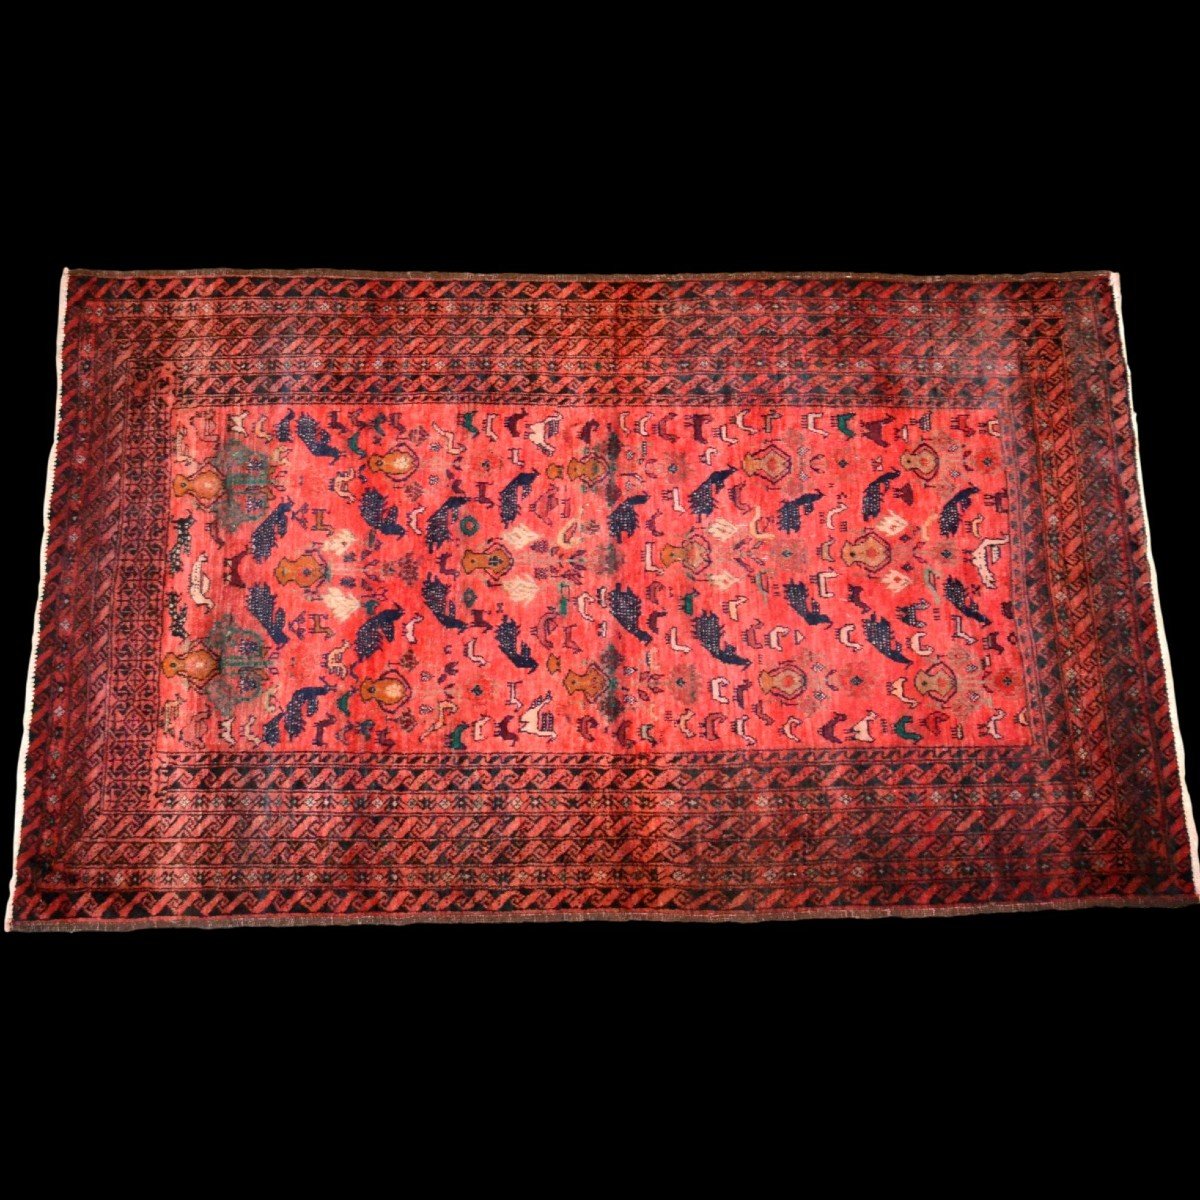 Baluche, Animal Decor, 115 X 193 Cm, Hand-knotted Wool In Iran, 1950-1960, Very Good Condition-photo-3